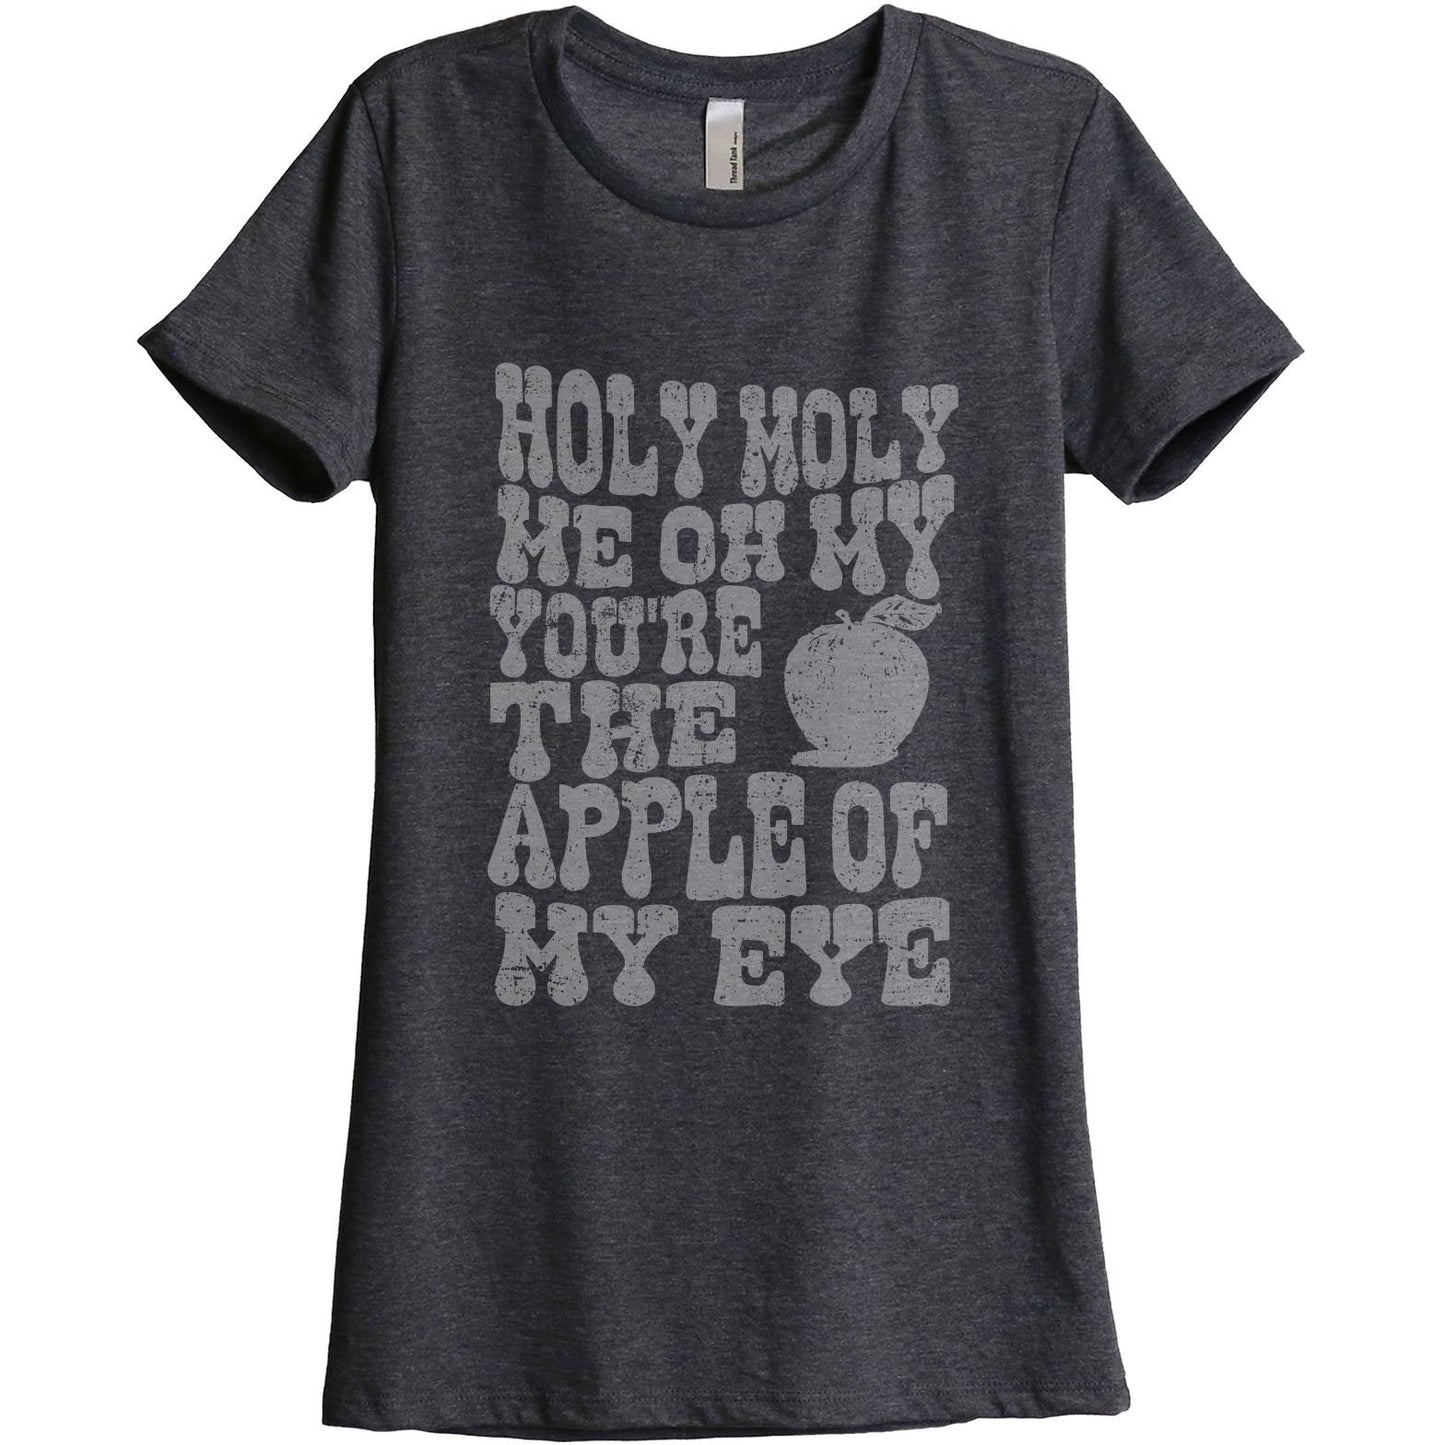 Holy Moly Me Oh My You're The Apple Of My Eye Women's Relaxed Crewneck T-Shirt Top Tee Charcoal Grey
